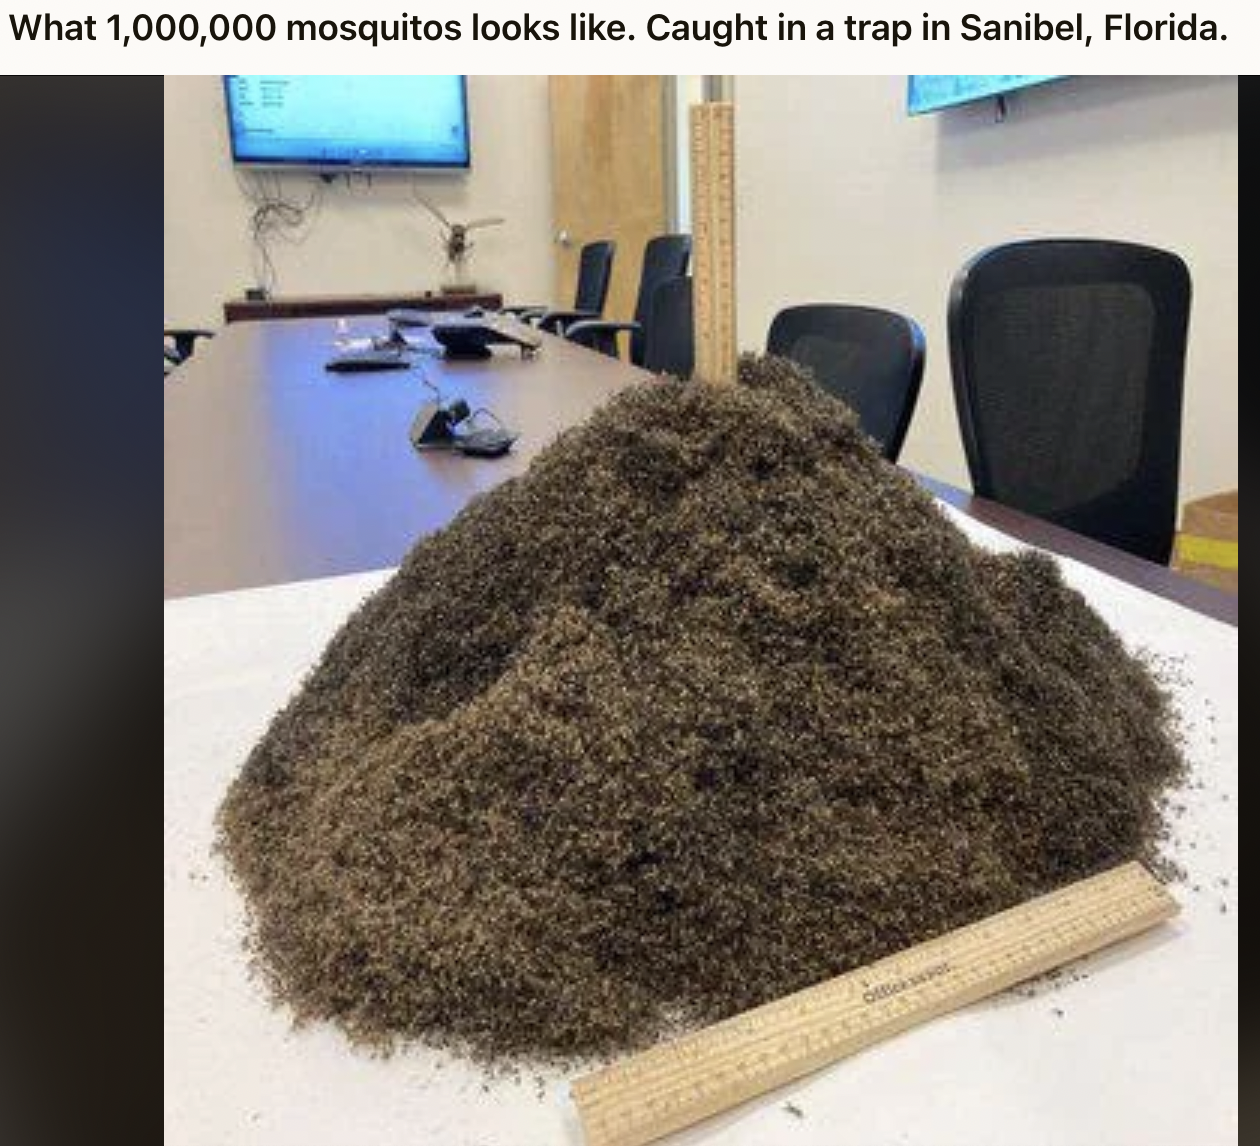 million mosquitoes - What 1,000,000 mosquitos looks . Caught in a trap in Sanibel, Florida.